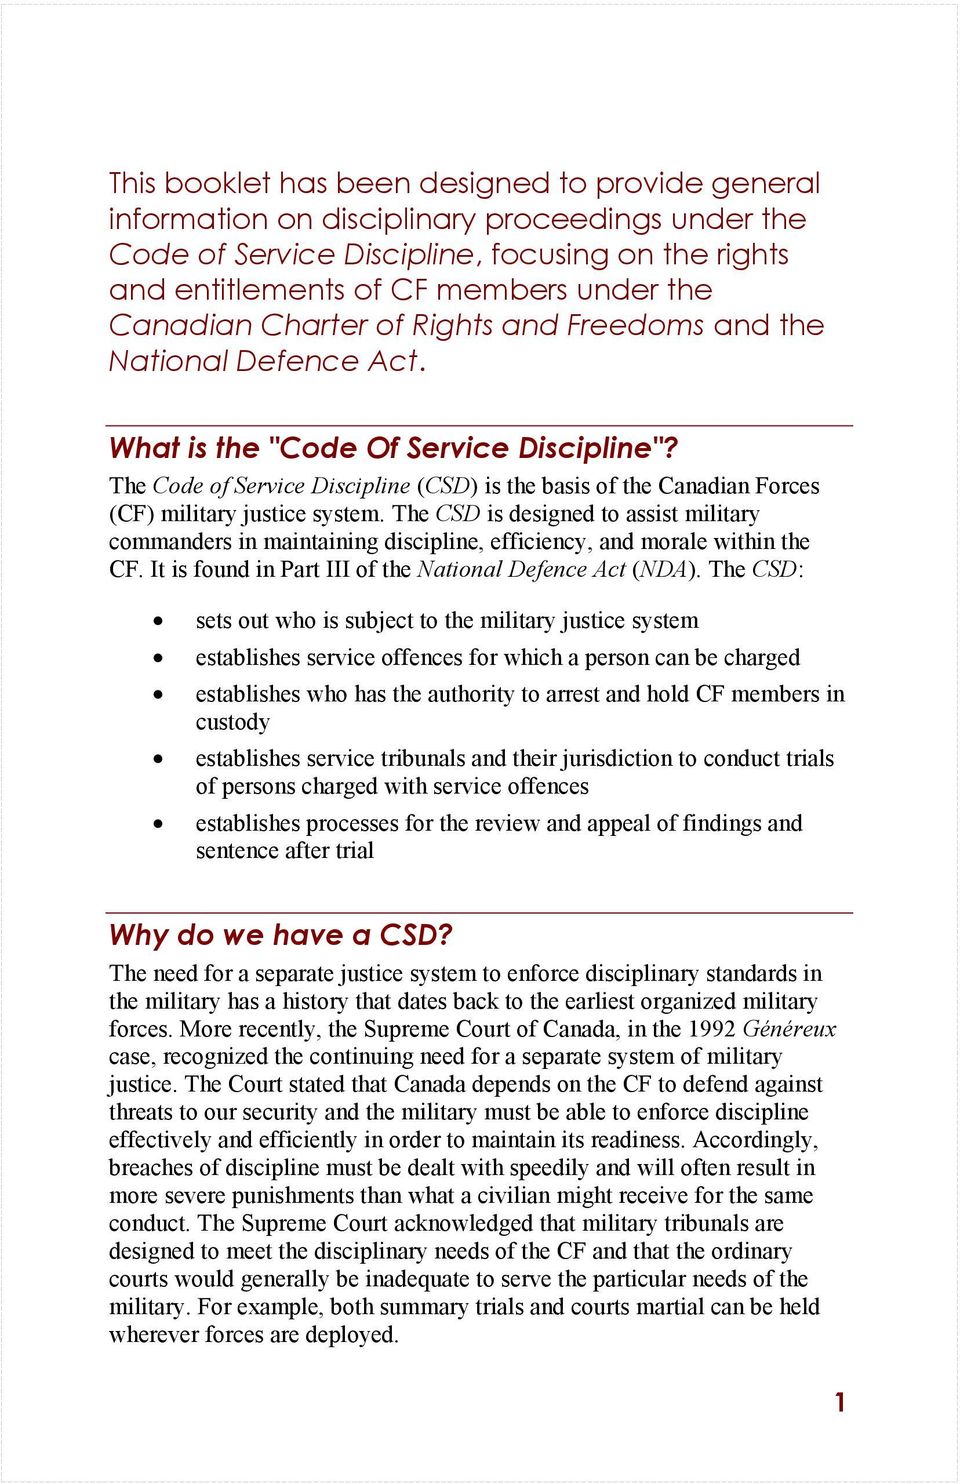 The Code of Service Discipline (CSD) is the basis of the Canadian Forces (CF) military justice system.